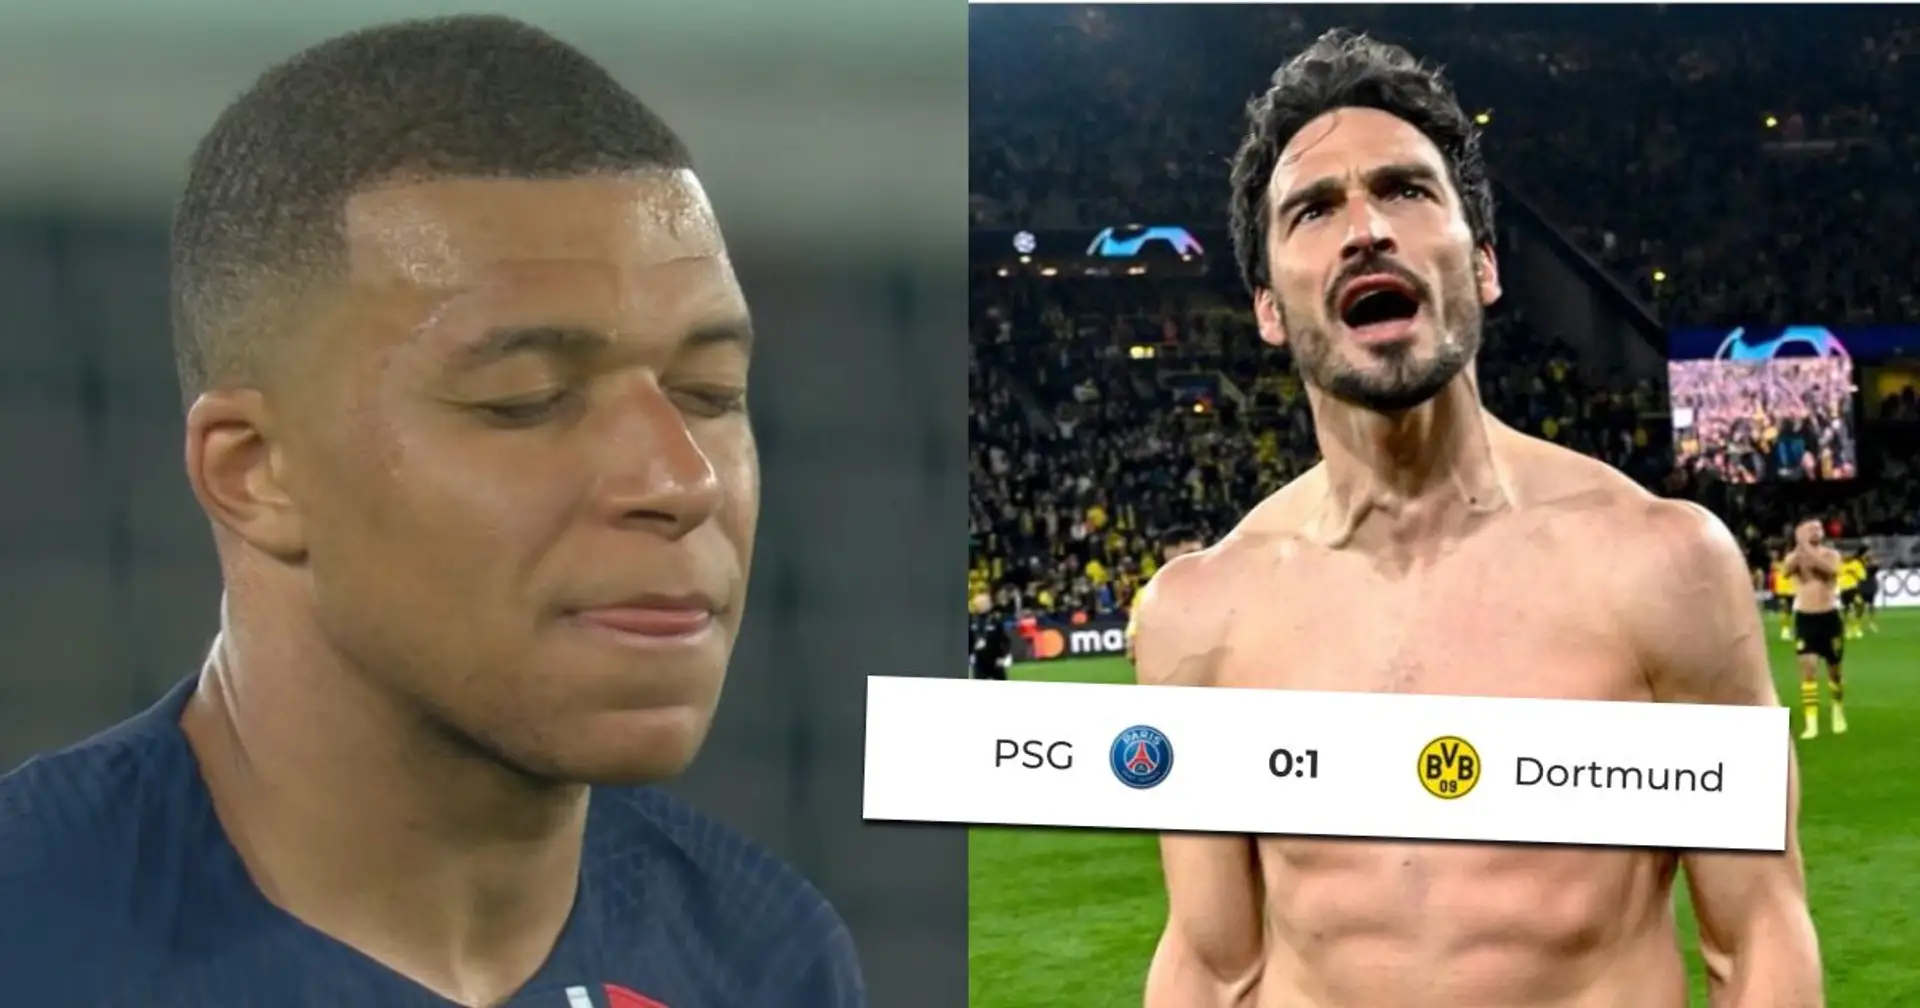 Mbappe fails to deliver Champions League to PSG as Dortmund knock Paris out and advance to final